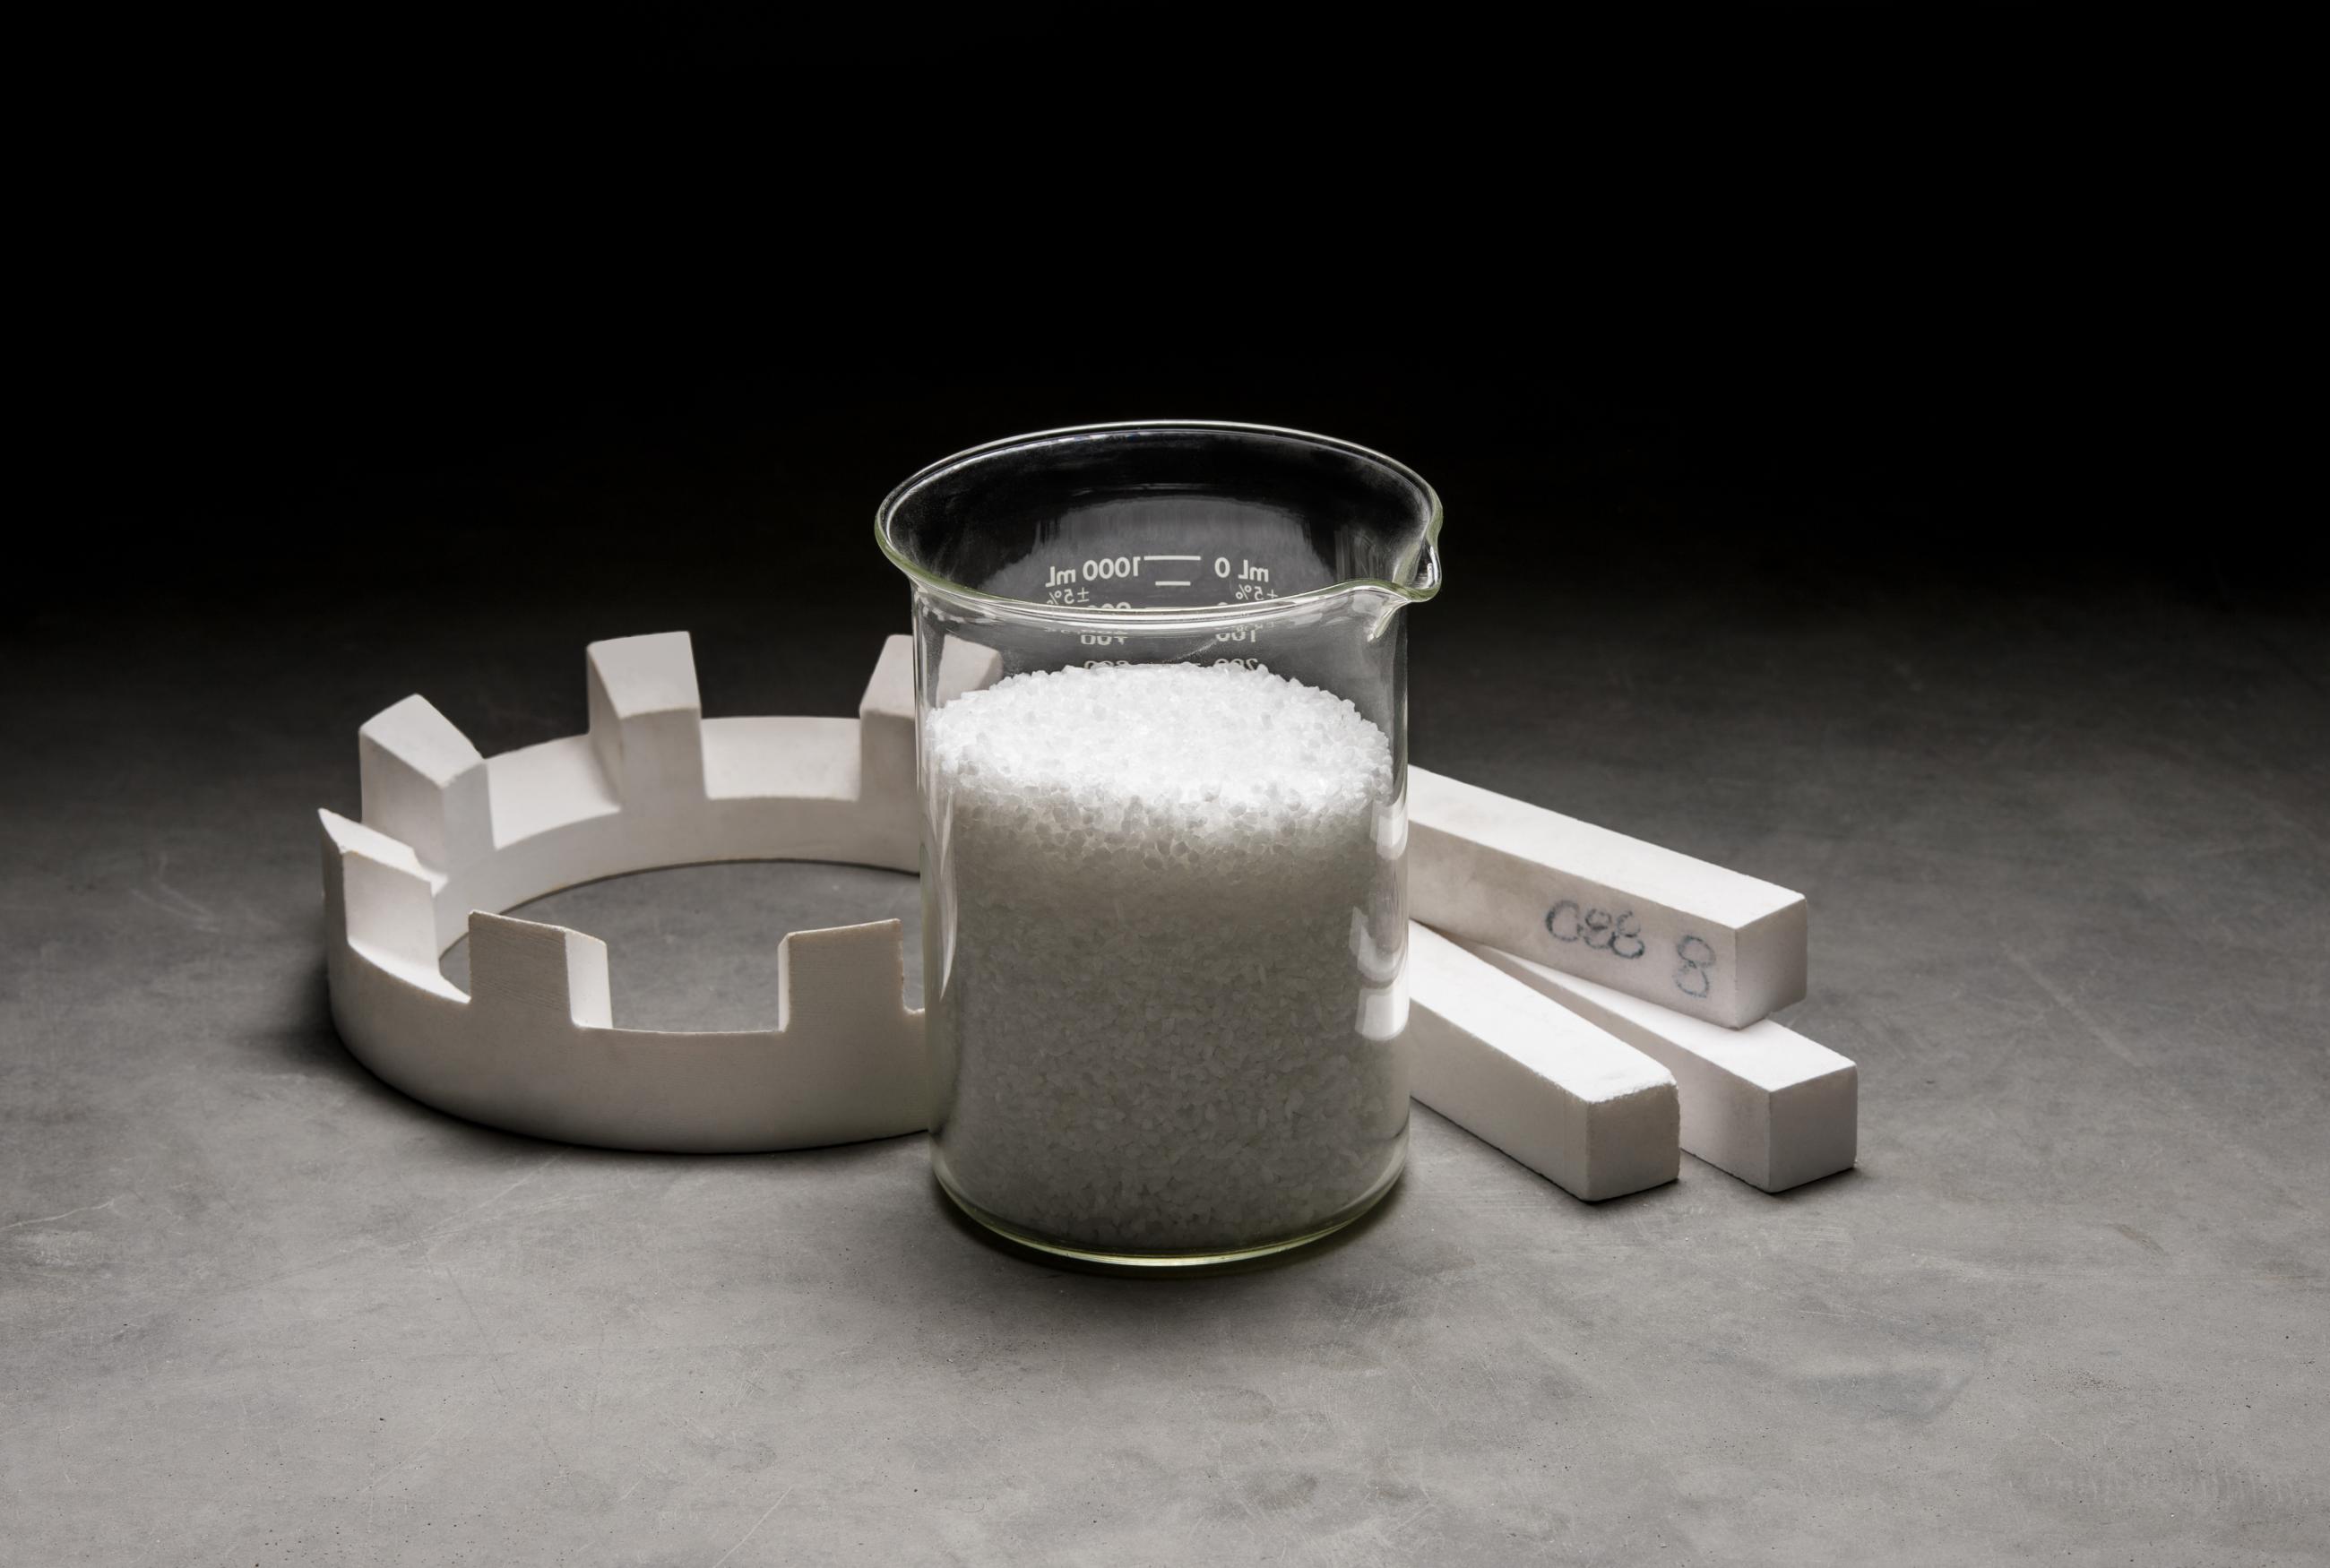 Product imagery to represent alumina material offerings